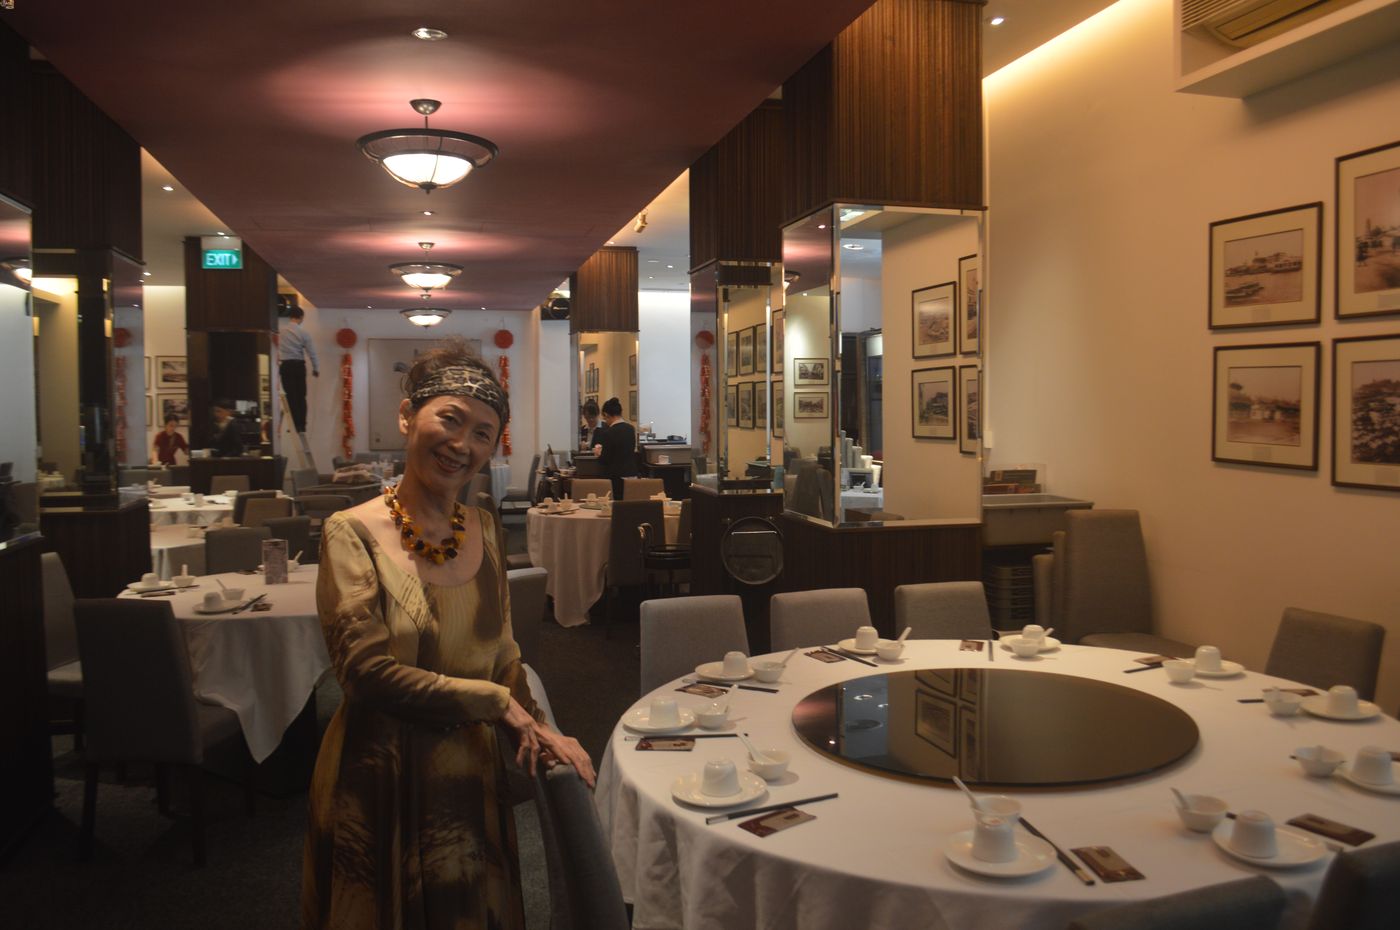 Mdm Soon Puay Keow is the operator of the Cantonese Spring Court restaurant, first started in 1929 by her father-in-law.